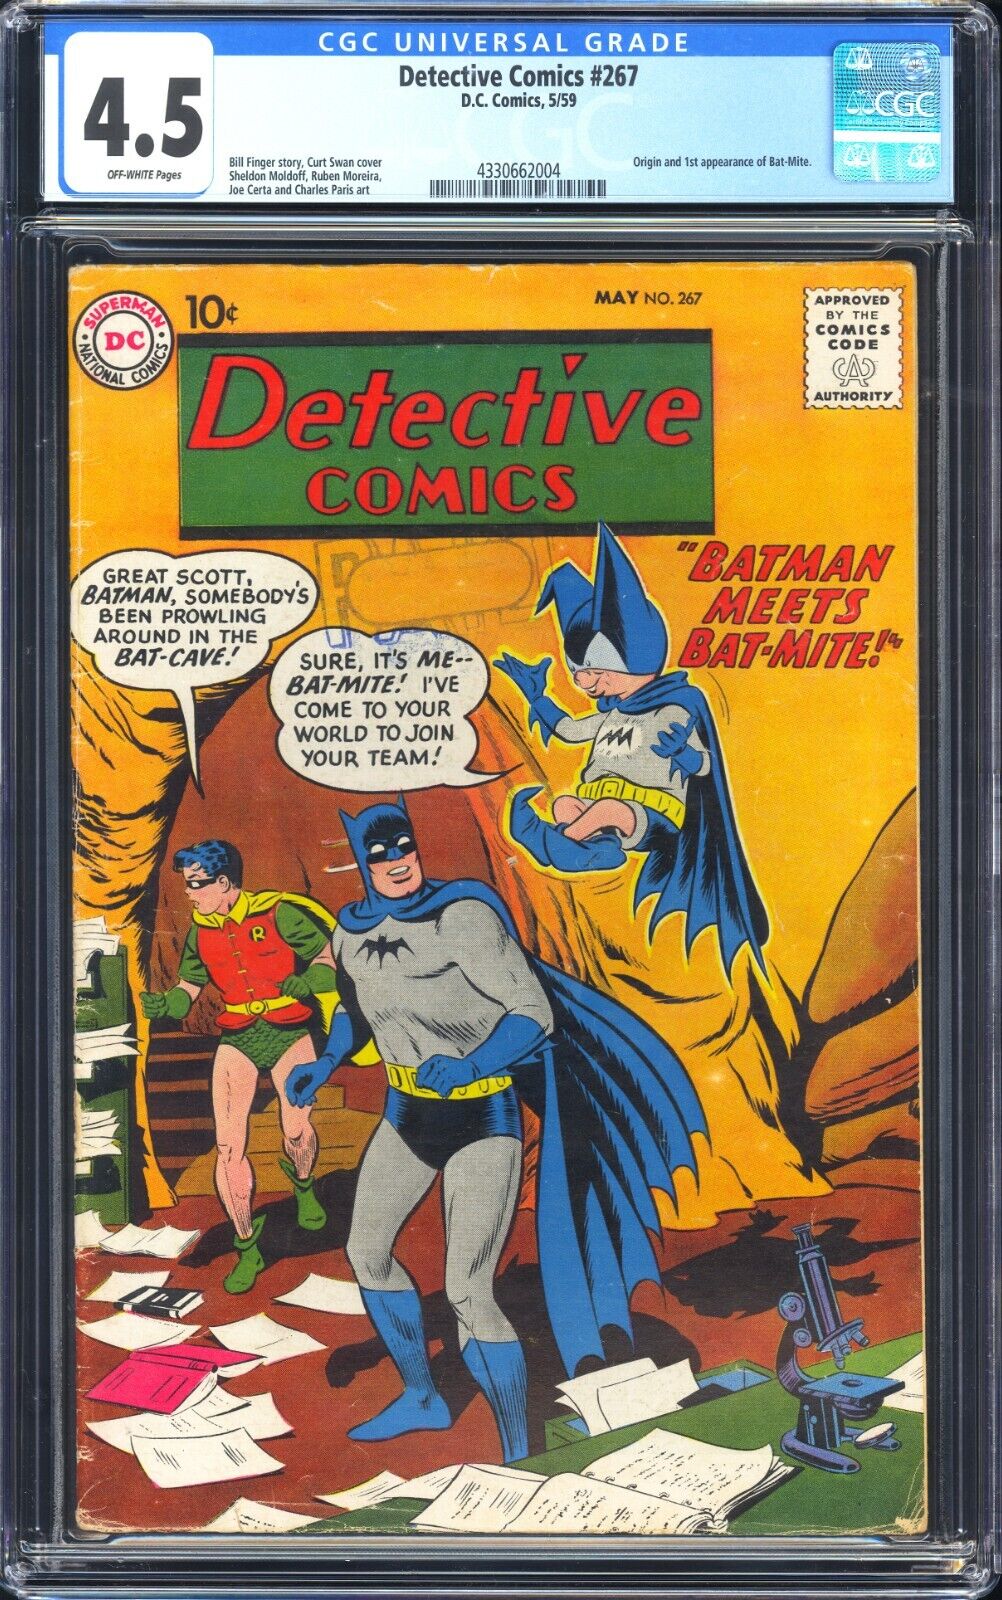 DC Detective Comics #267 CGC 4.5 OW Pages 1959 Origin and First App. Bat Mite